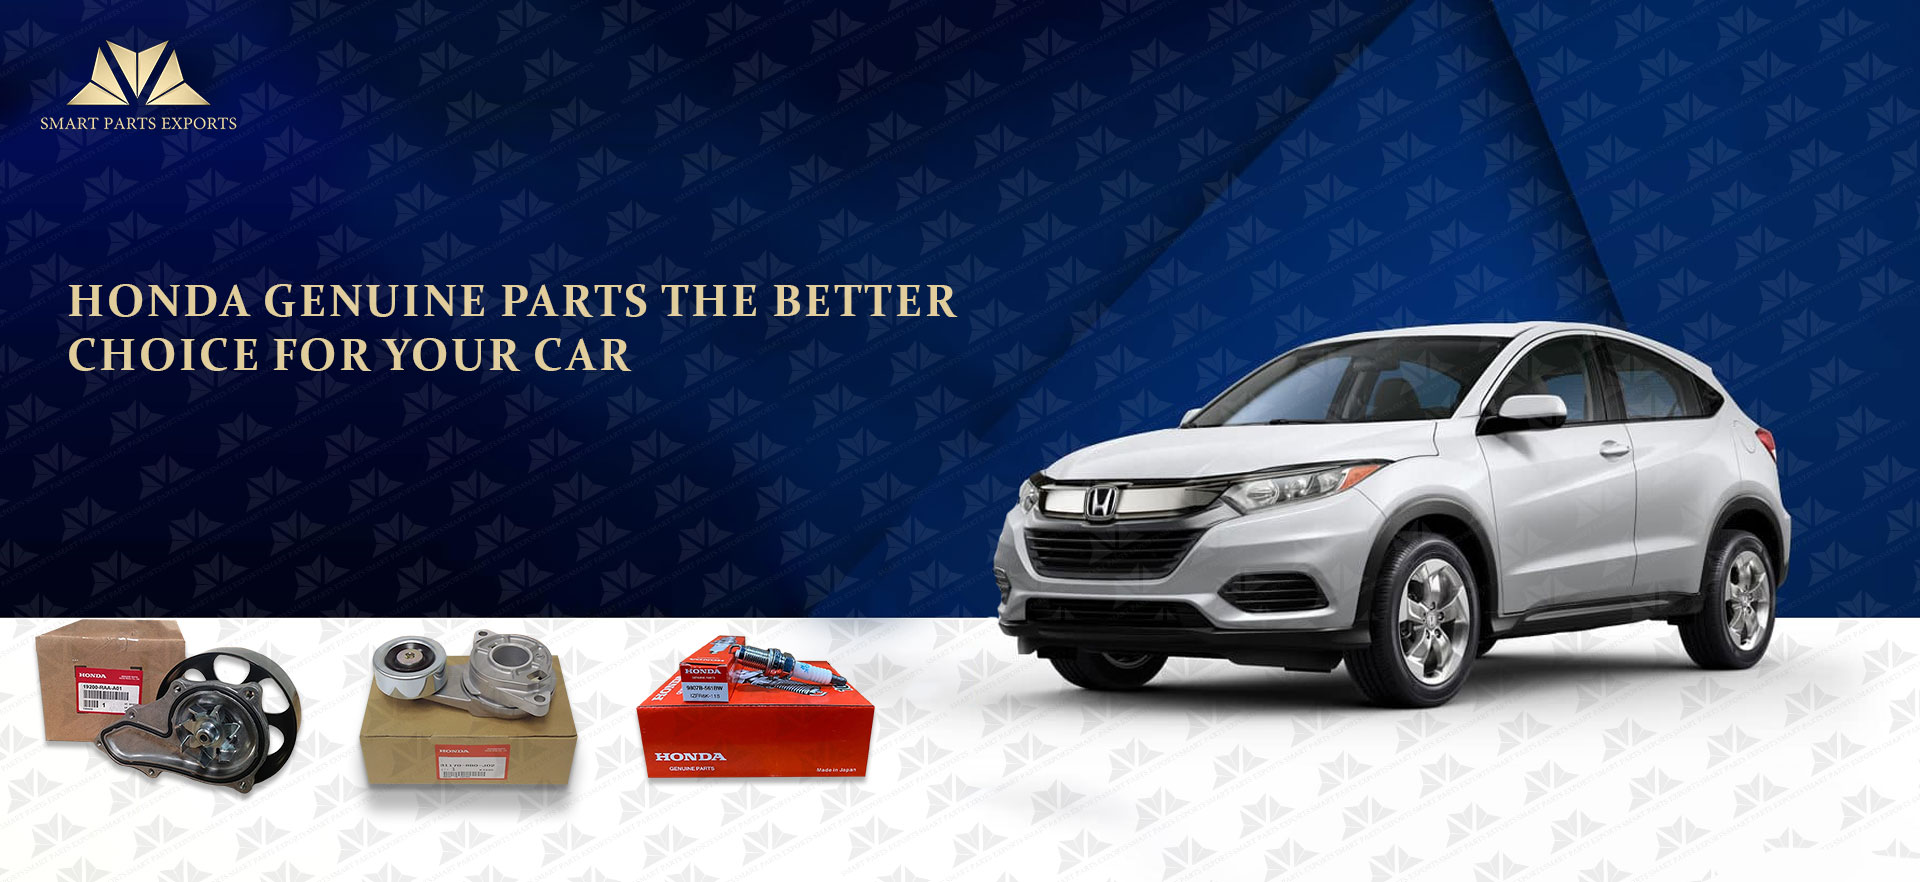 Honda Genuine Parts: The Better Choice for Your Car